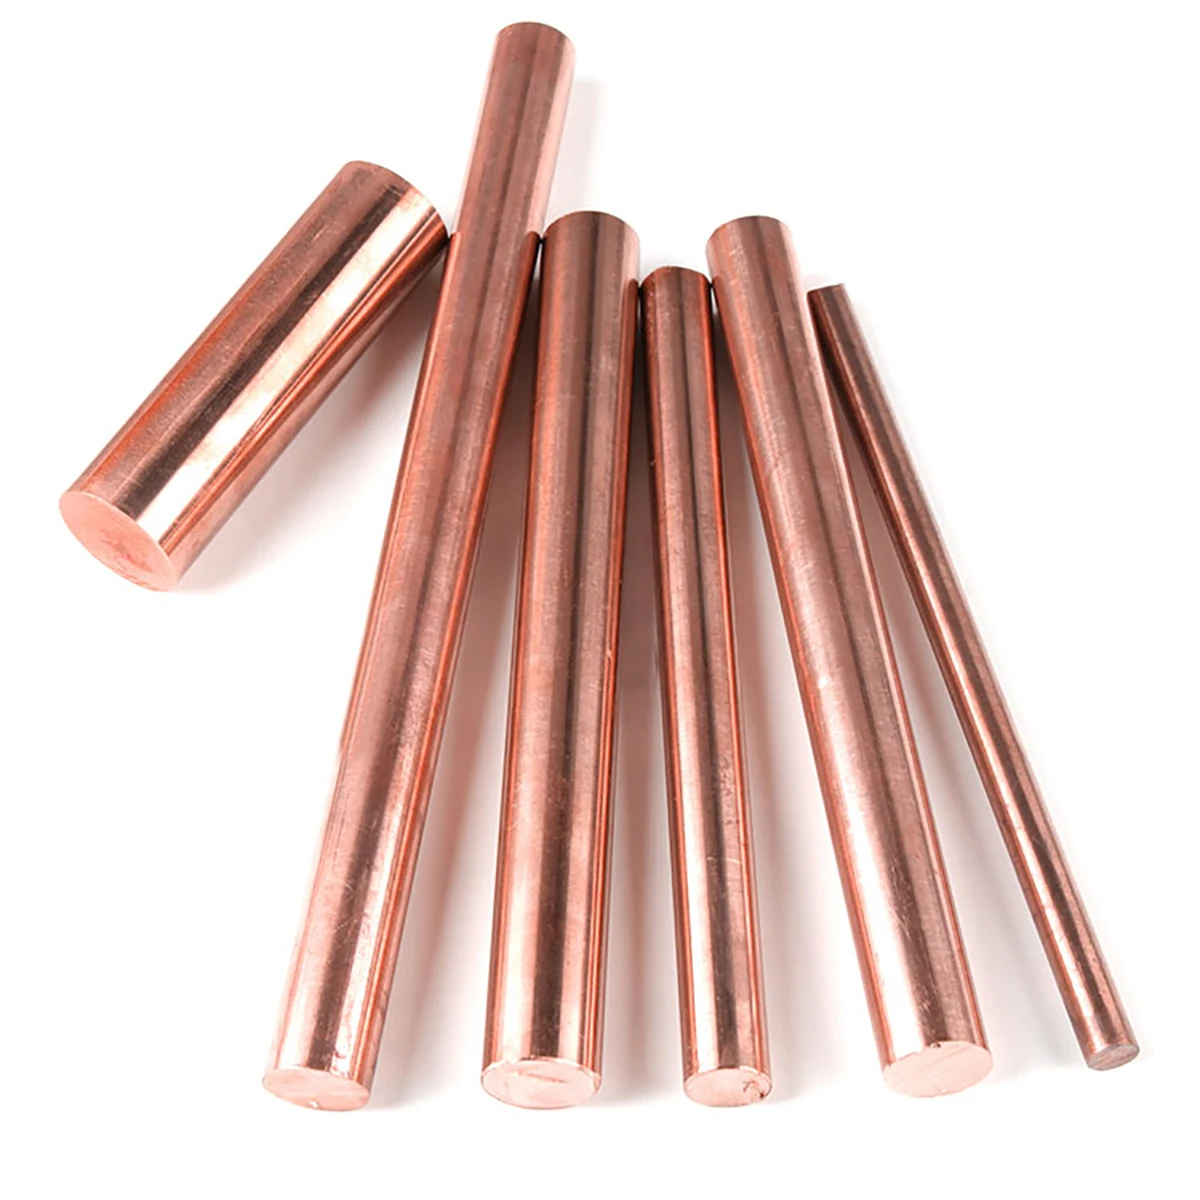 Diameter 6mm T2 Red Copper Round Bar Rod Pure Copper Stick Length 650mm for Milling Welding Metalworking